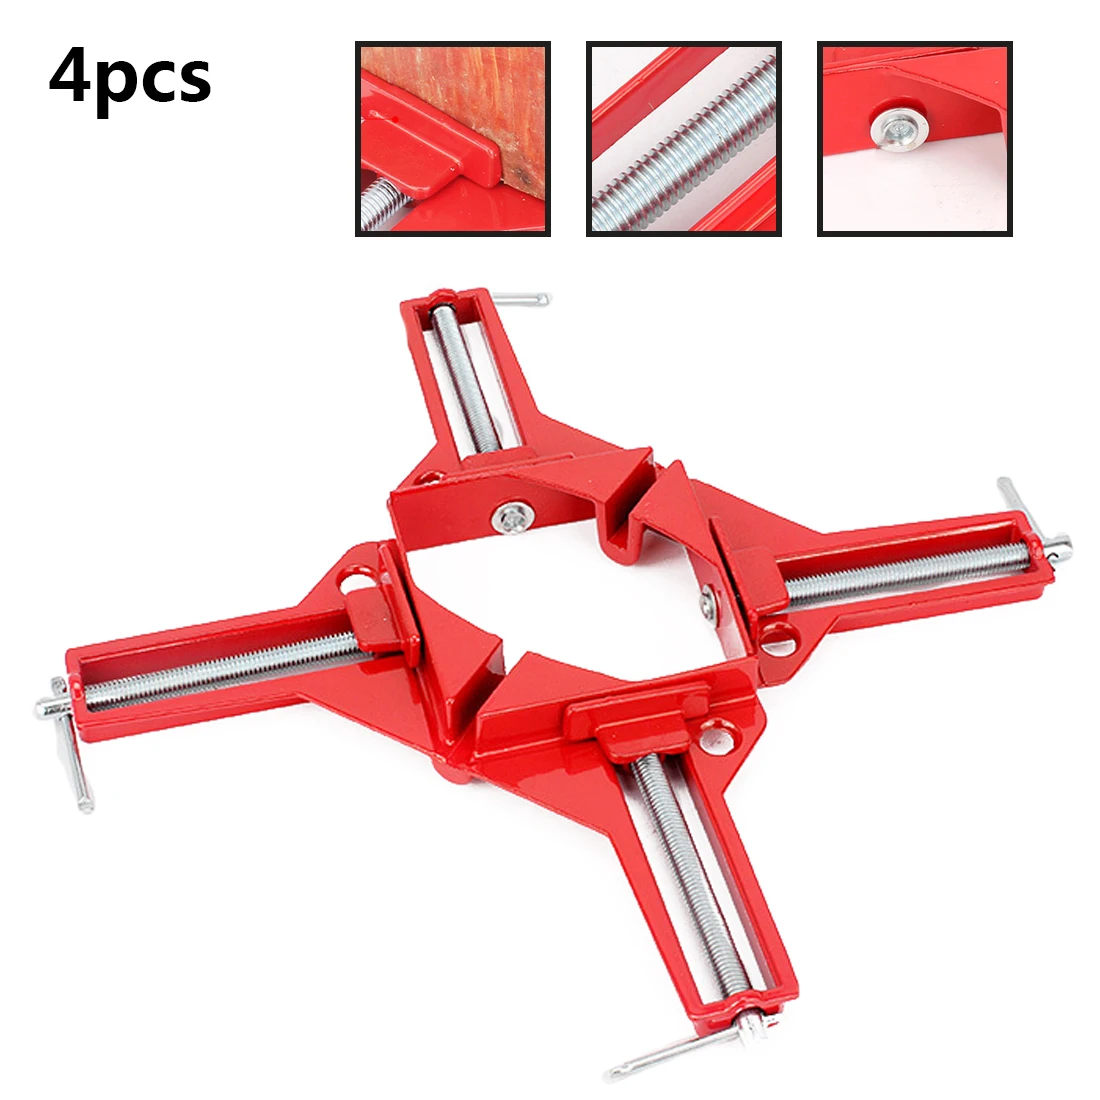 4PCS 90 Degree Right Angle Clamp Holder Picture Frame Woodworking Corner Clamp 